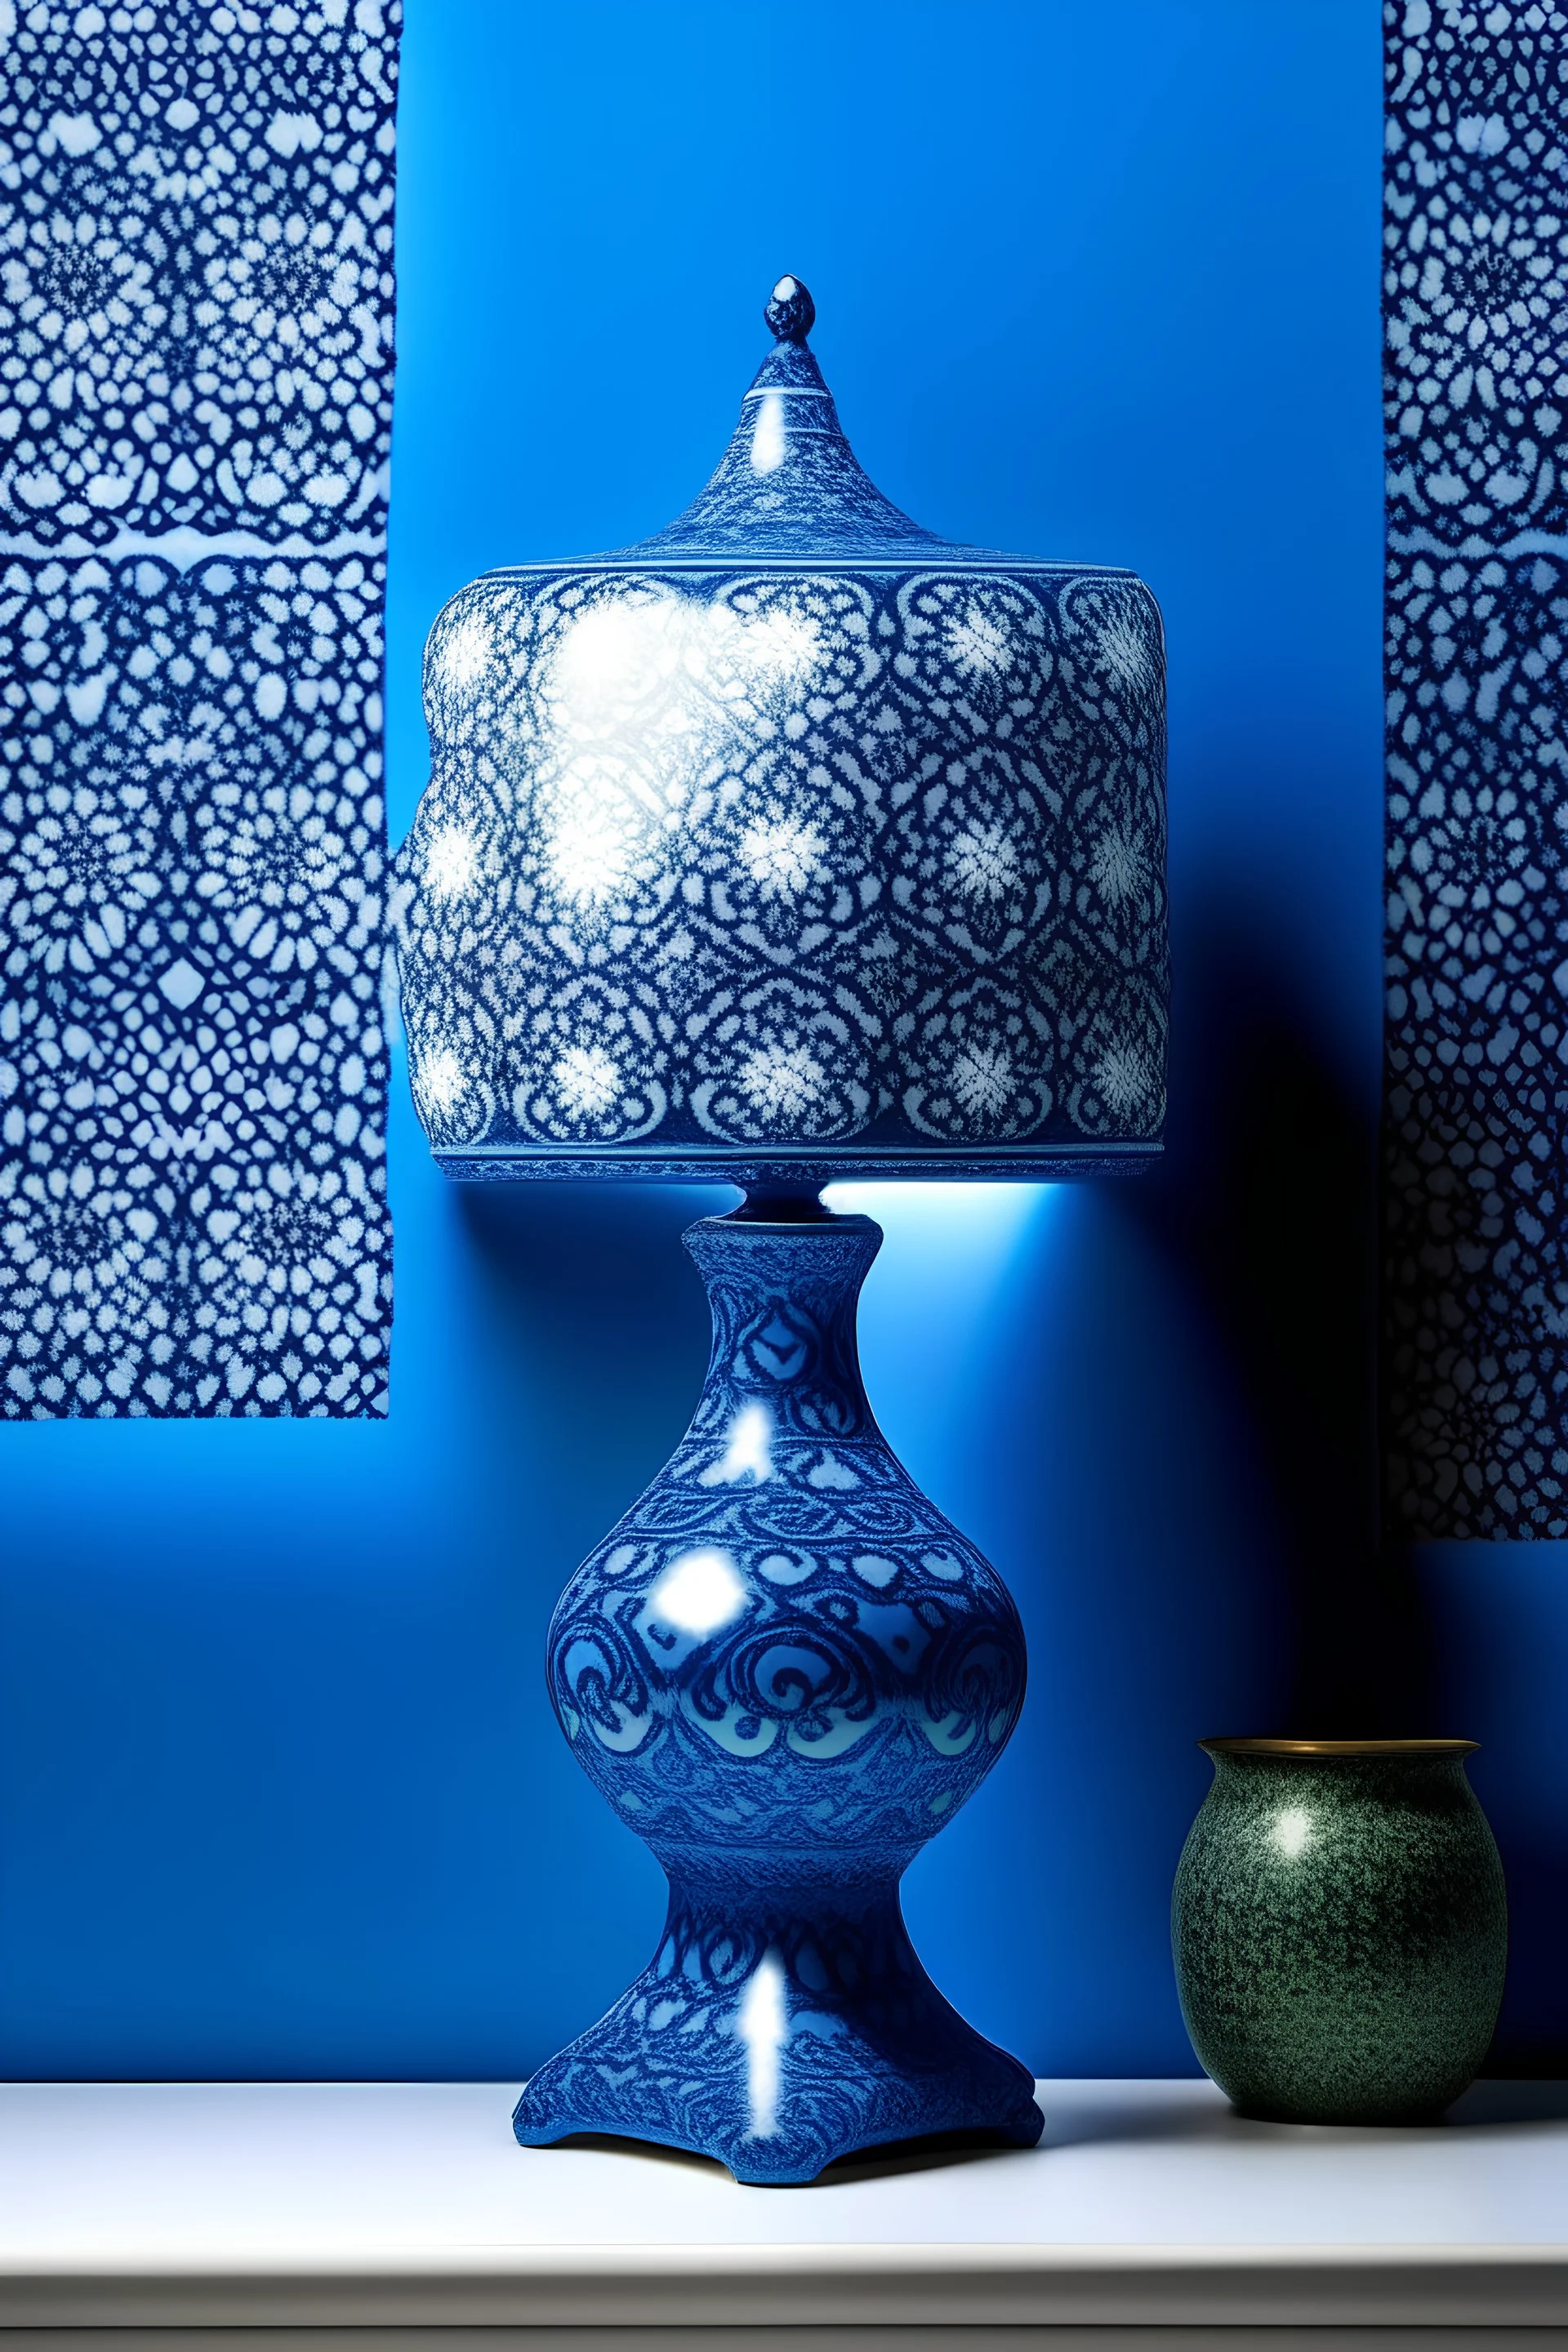 Portuguese tiles pattern ceramic vase with a blue big lampshade on a blue background